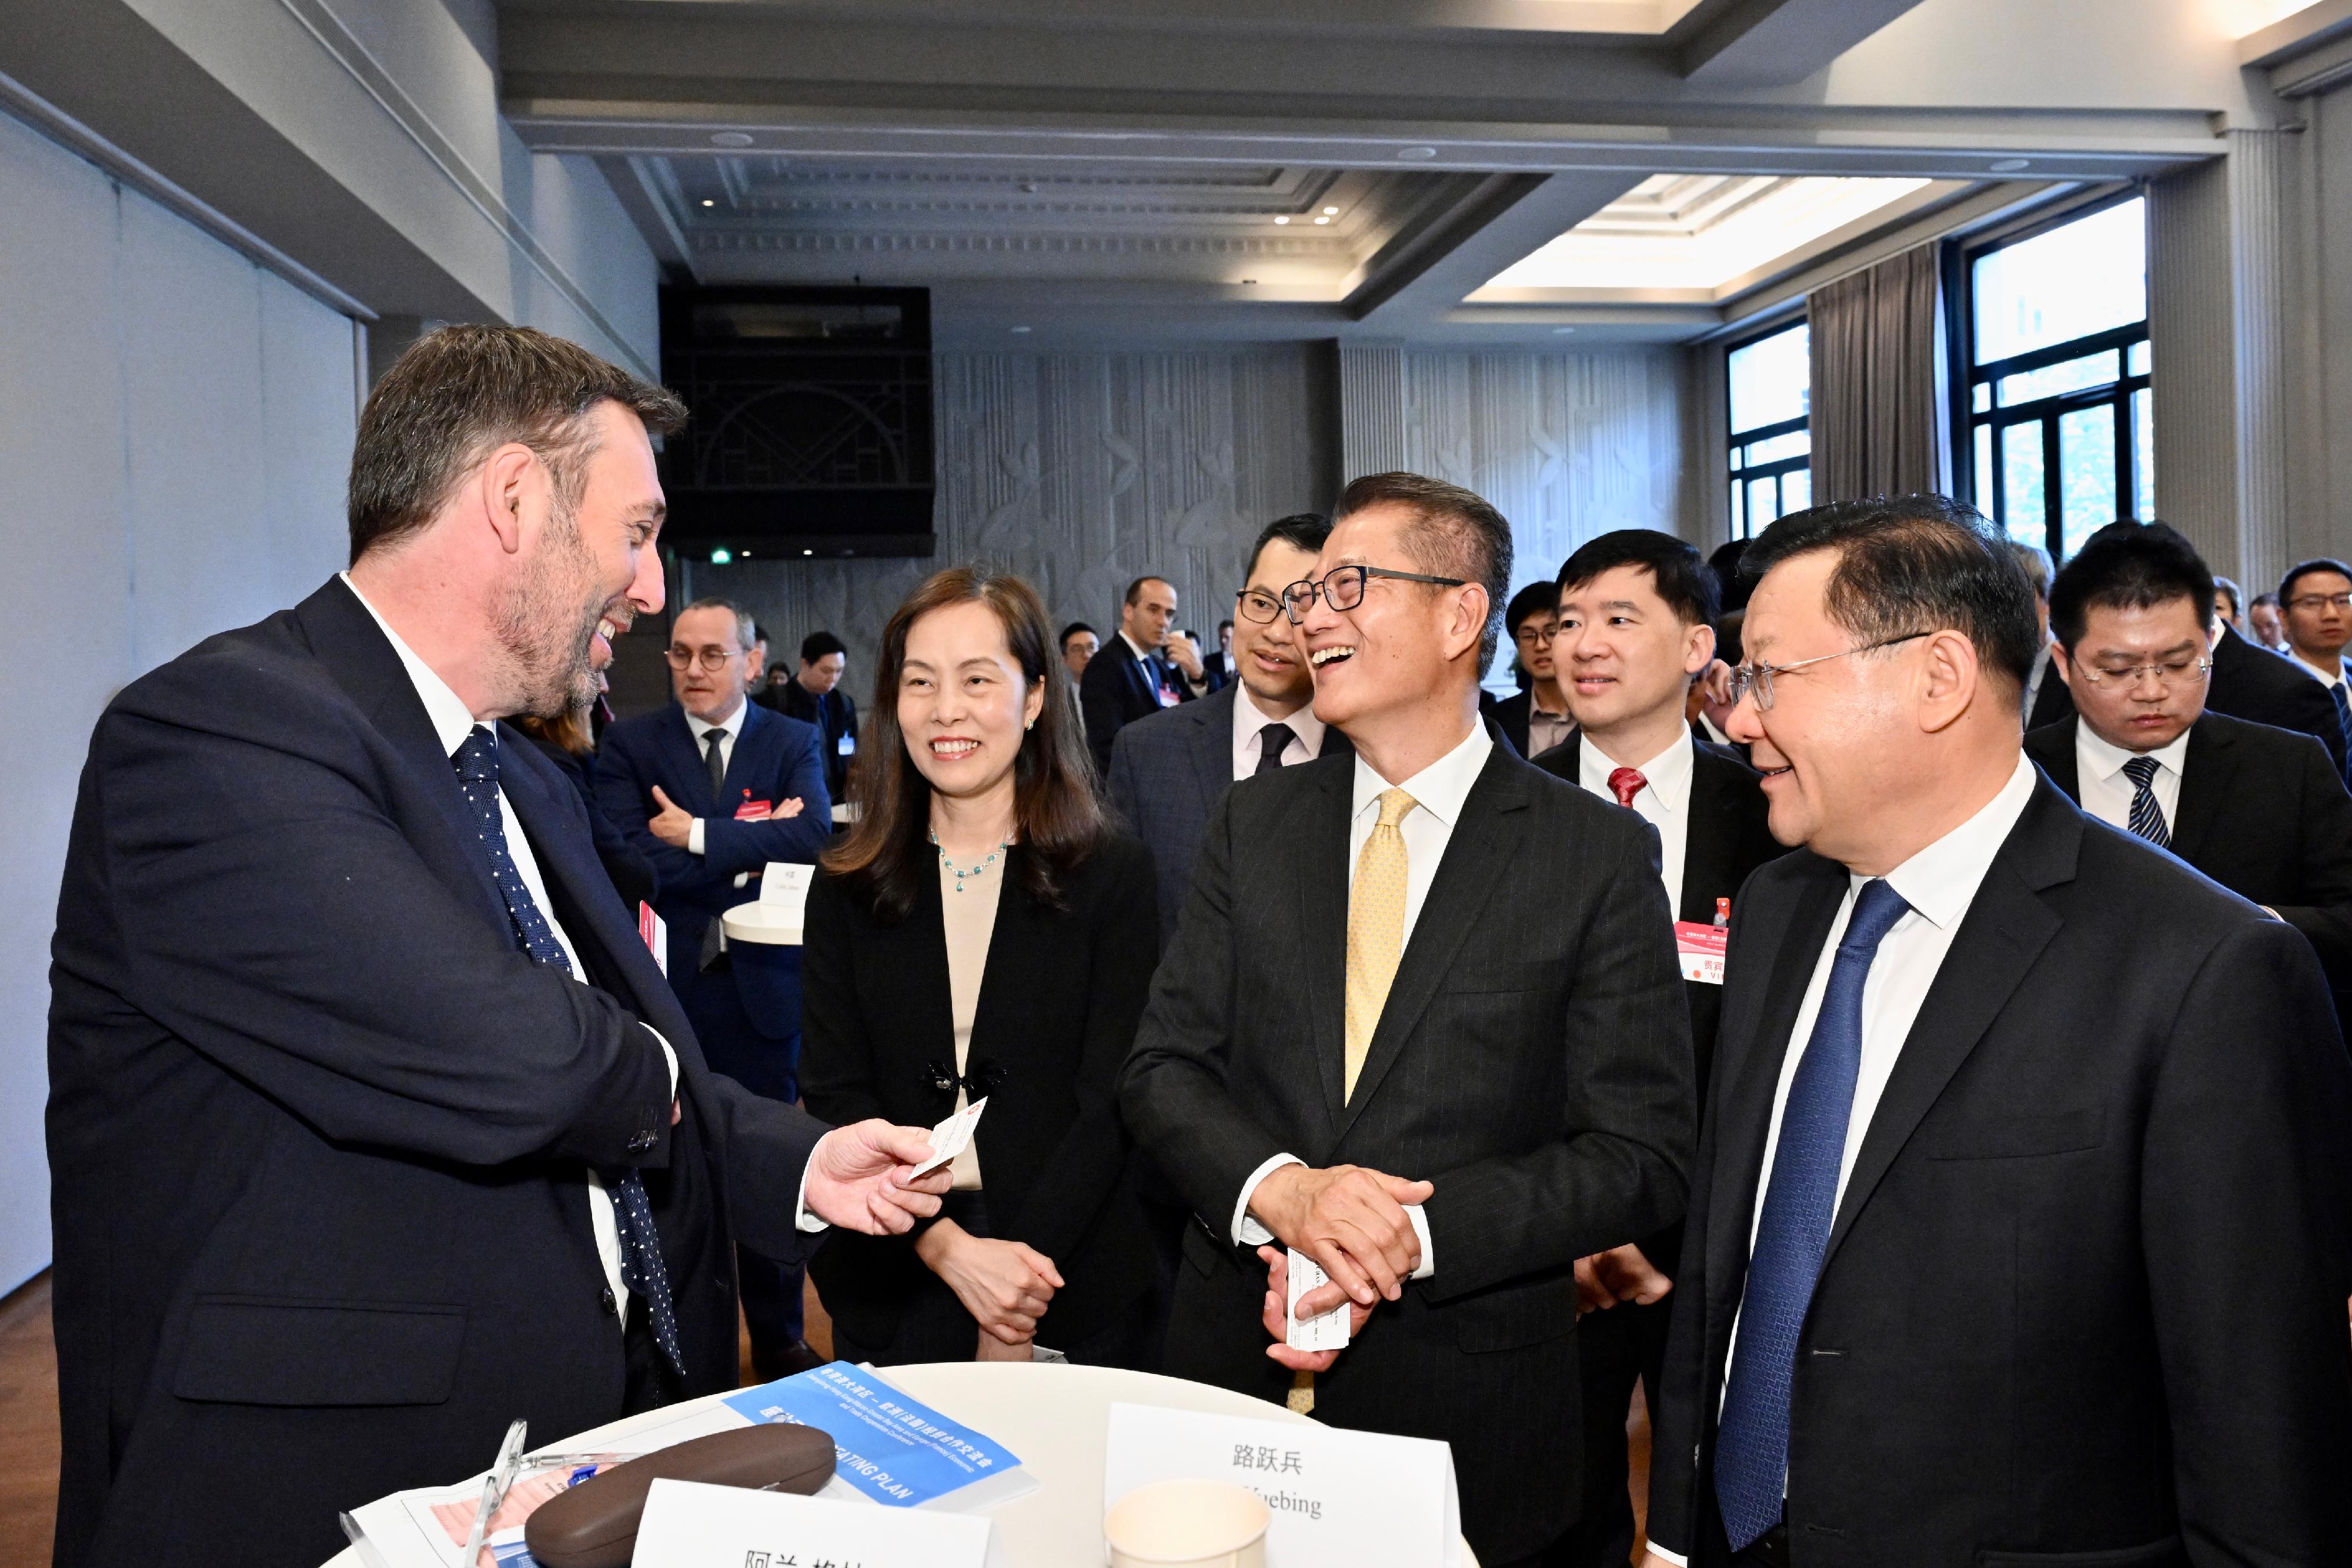 The Financial Secretary, Mr Paul Chan, attended the Guangdong-Hong Kong-Macao Greater Bay Area and Europe (France) Economic and Trade Cooperation Conference in Paris, France today (May 24, Paris time). Photo shows Mr Chan (second right); the Governor of Guangdong Province, Mr Wang Weizhong (first right); the Secretary for Social Affairs and Culture of the Macao Special Administrative Region, Ms Ao Ieong U (second left) exchanging views with guests from the French commercial and industrial sector before the Conference.